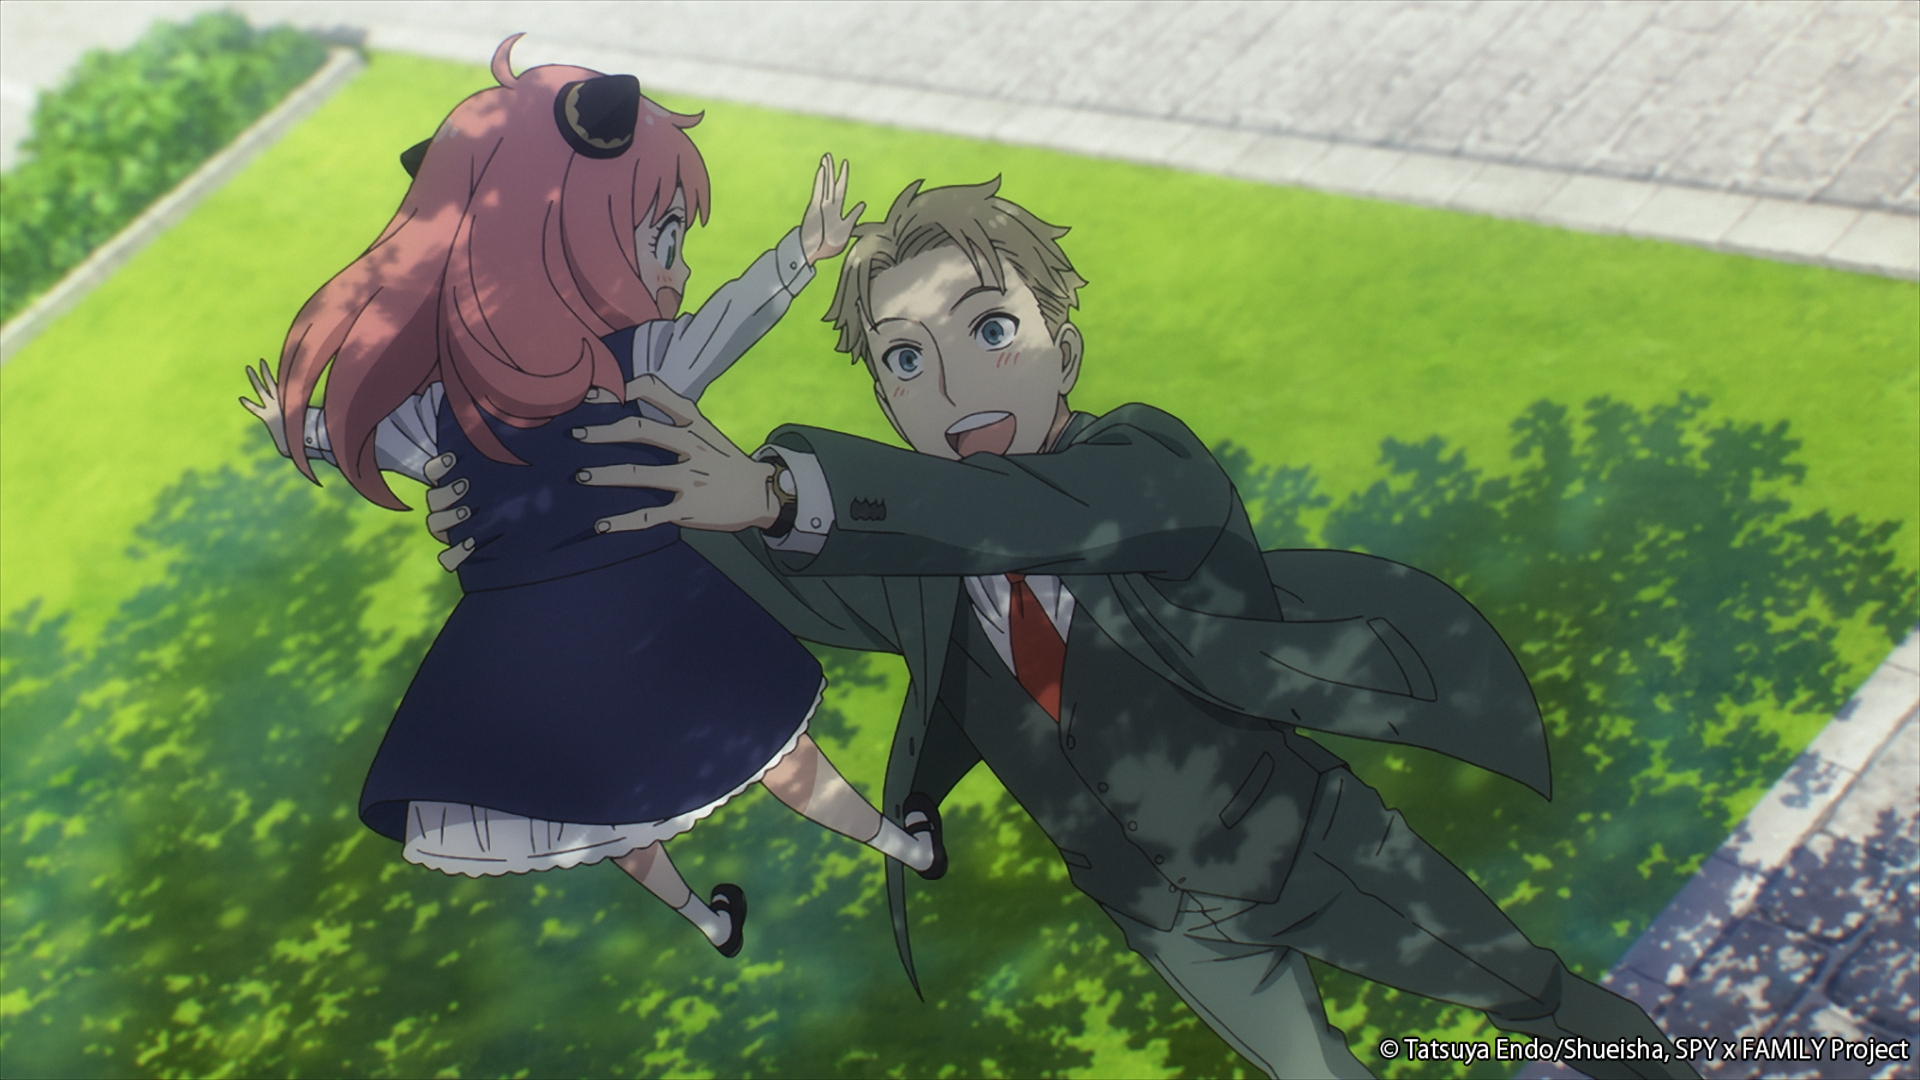 Loid from Spy X Family lifts Anya up in the air to celebrate